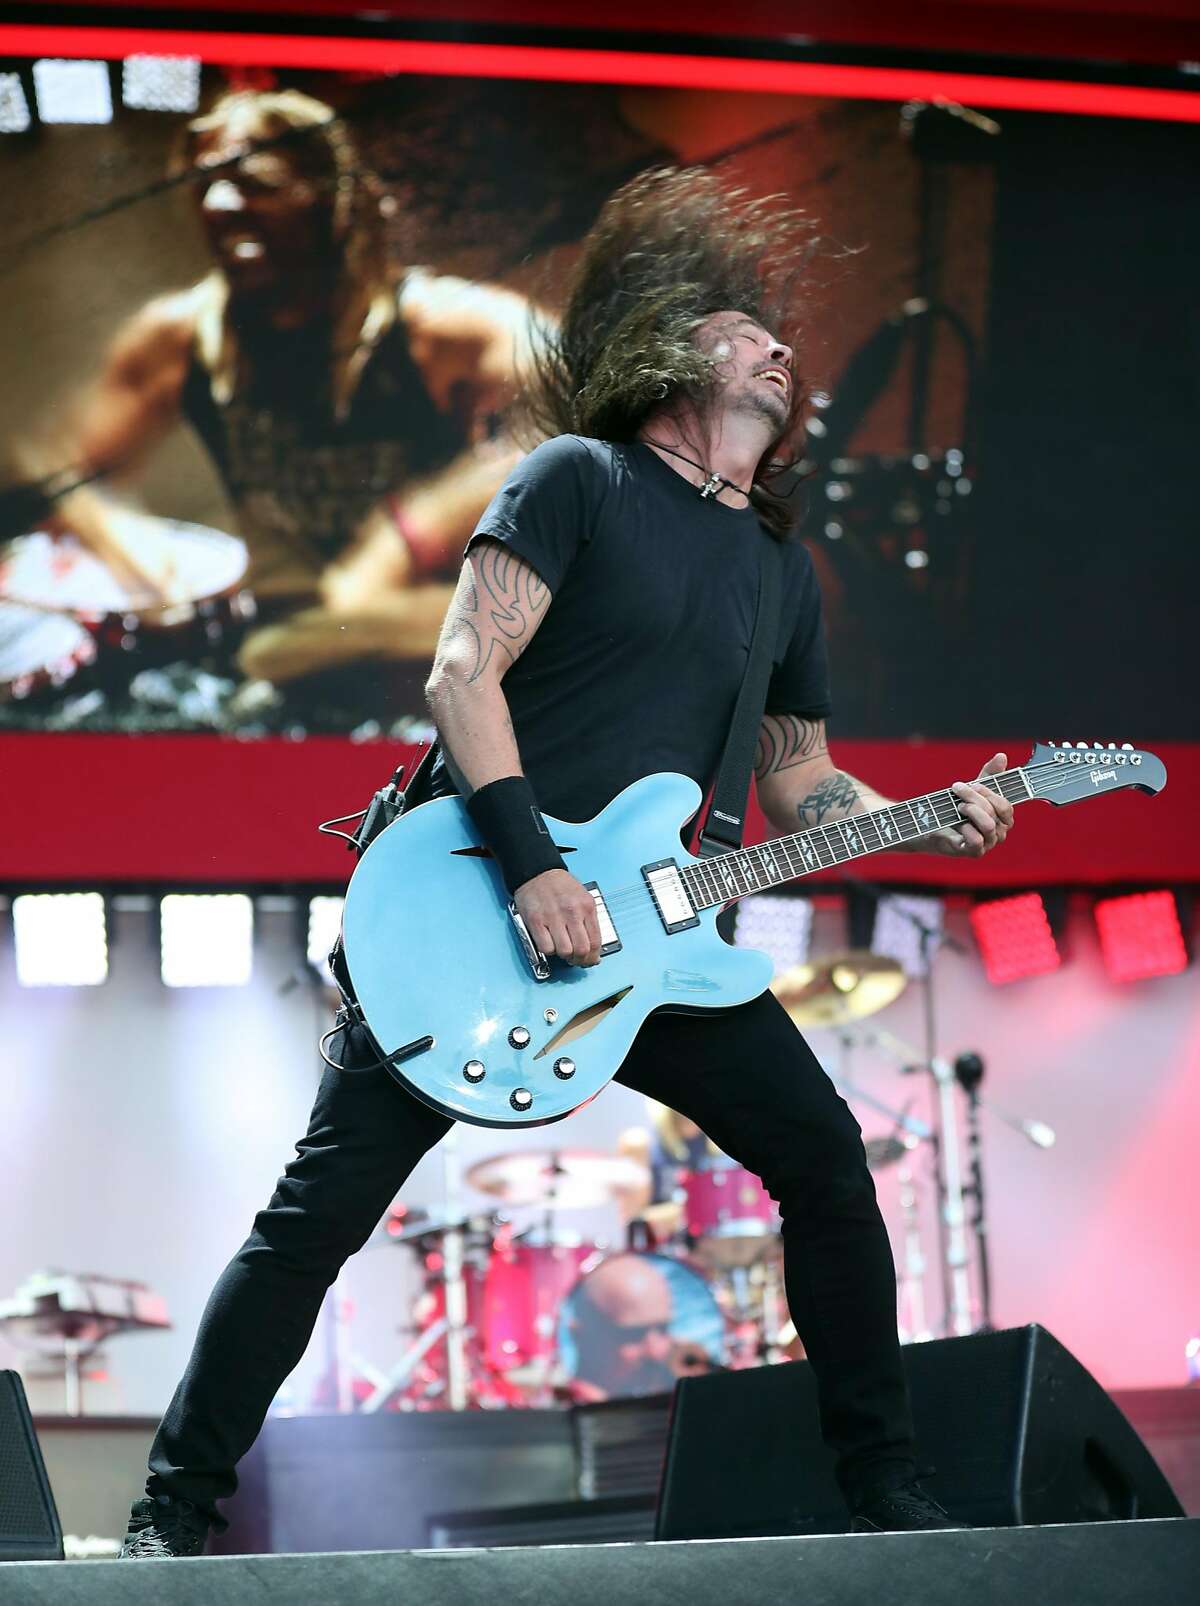 Dave Grohl of the Foo Fighters performs during BottleRock Napa Valley in Napa, Calif., on Sunday, May 28, 2017.